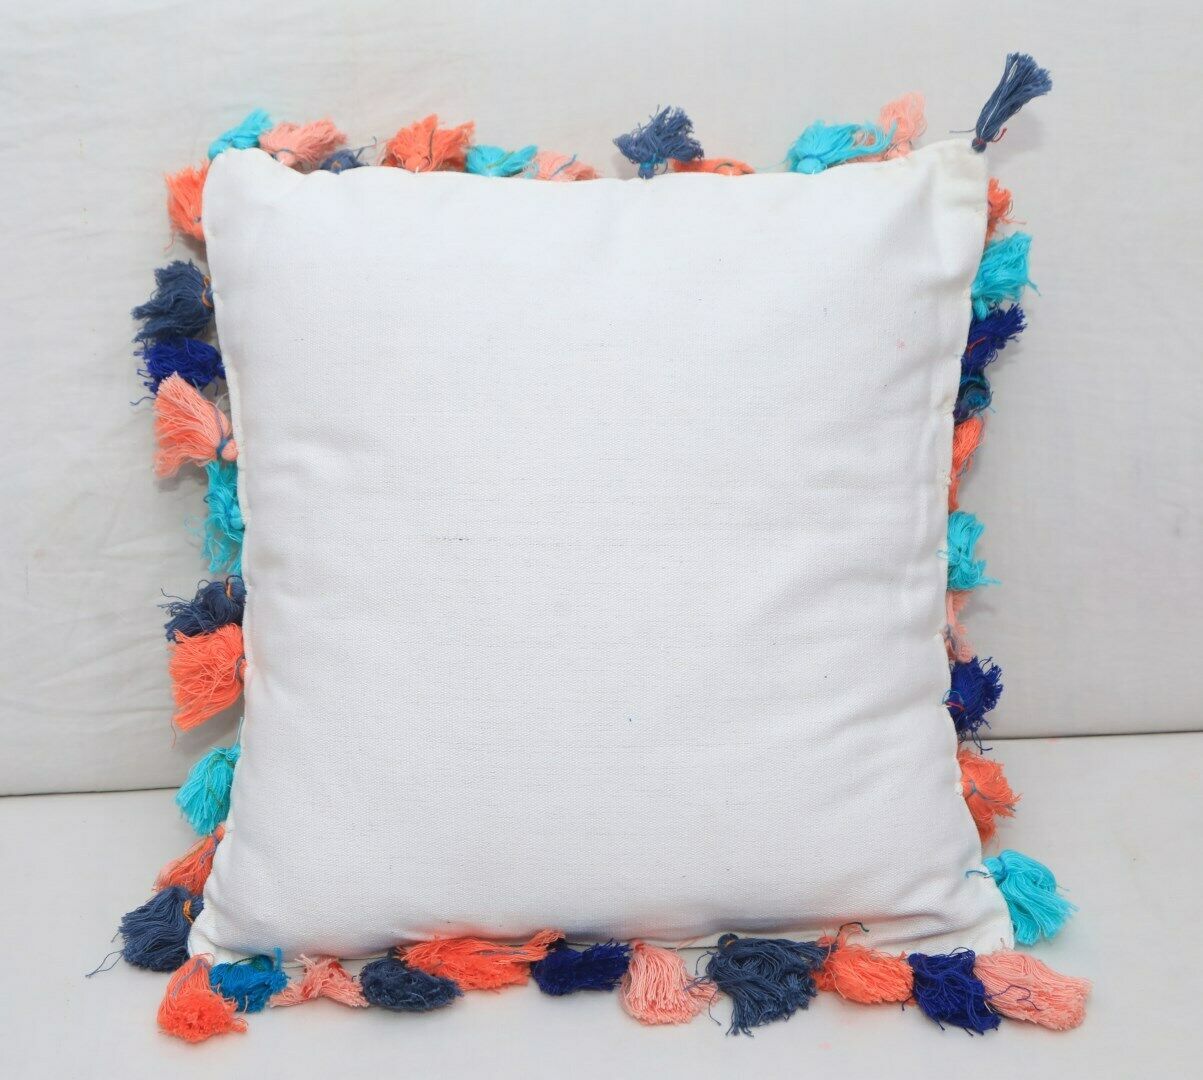 16 Rugged Textured Pure Cotton Plain Cushion/Pillow Cover With Tassels White